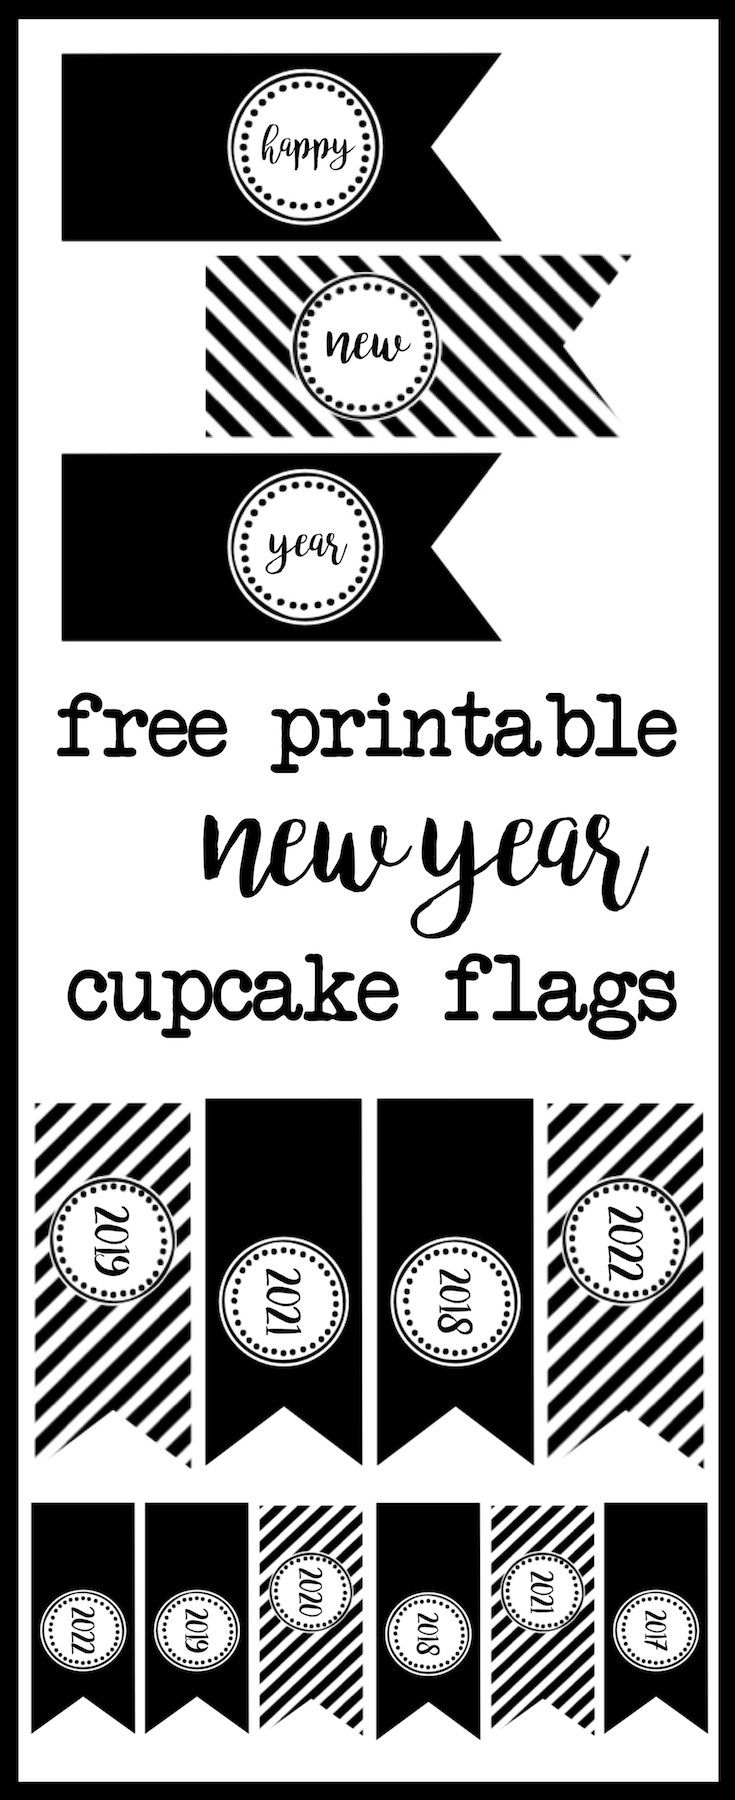 Celebrate The New Year With Free Printable Cupcake Toppers! - Cupcake Flags Free Printable